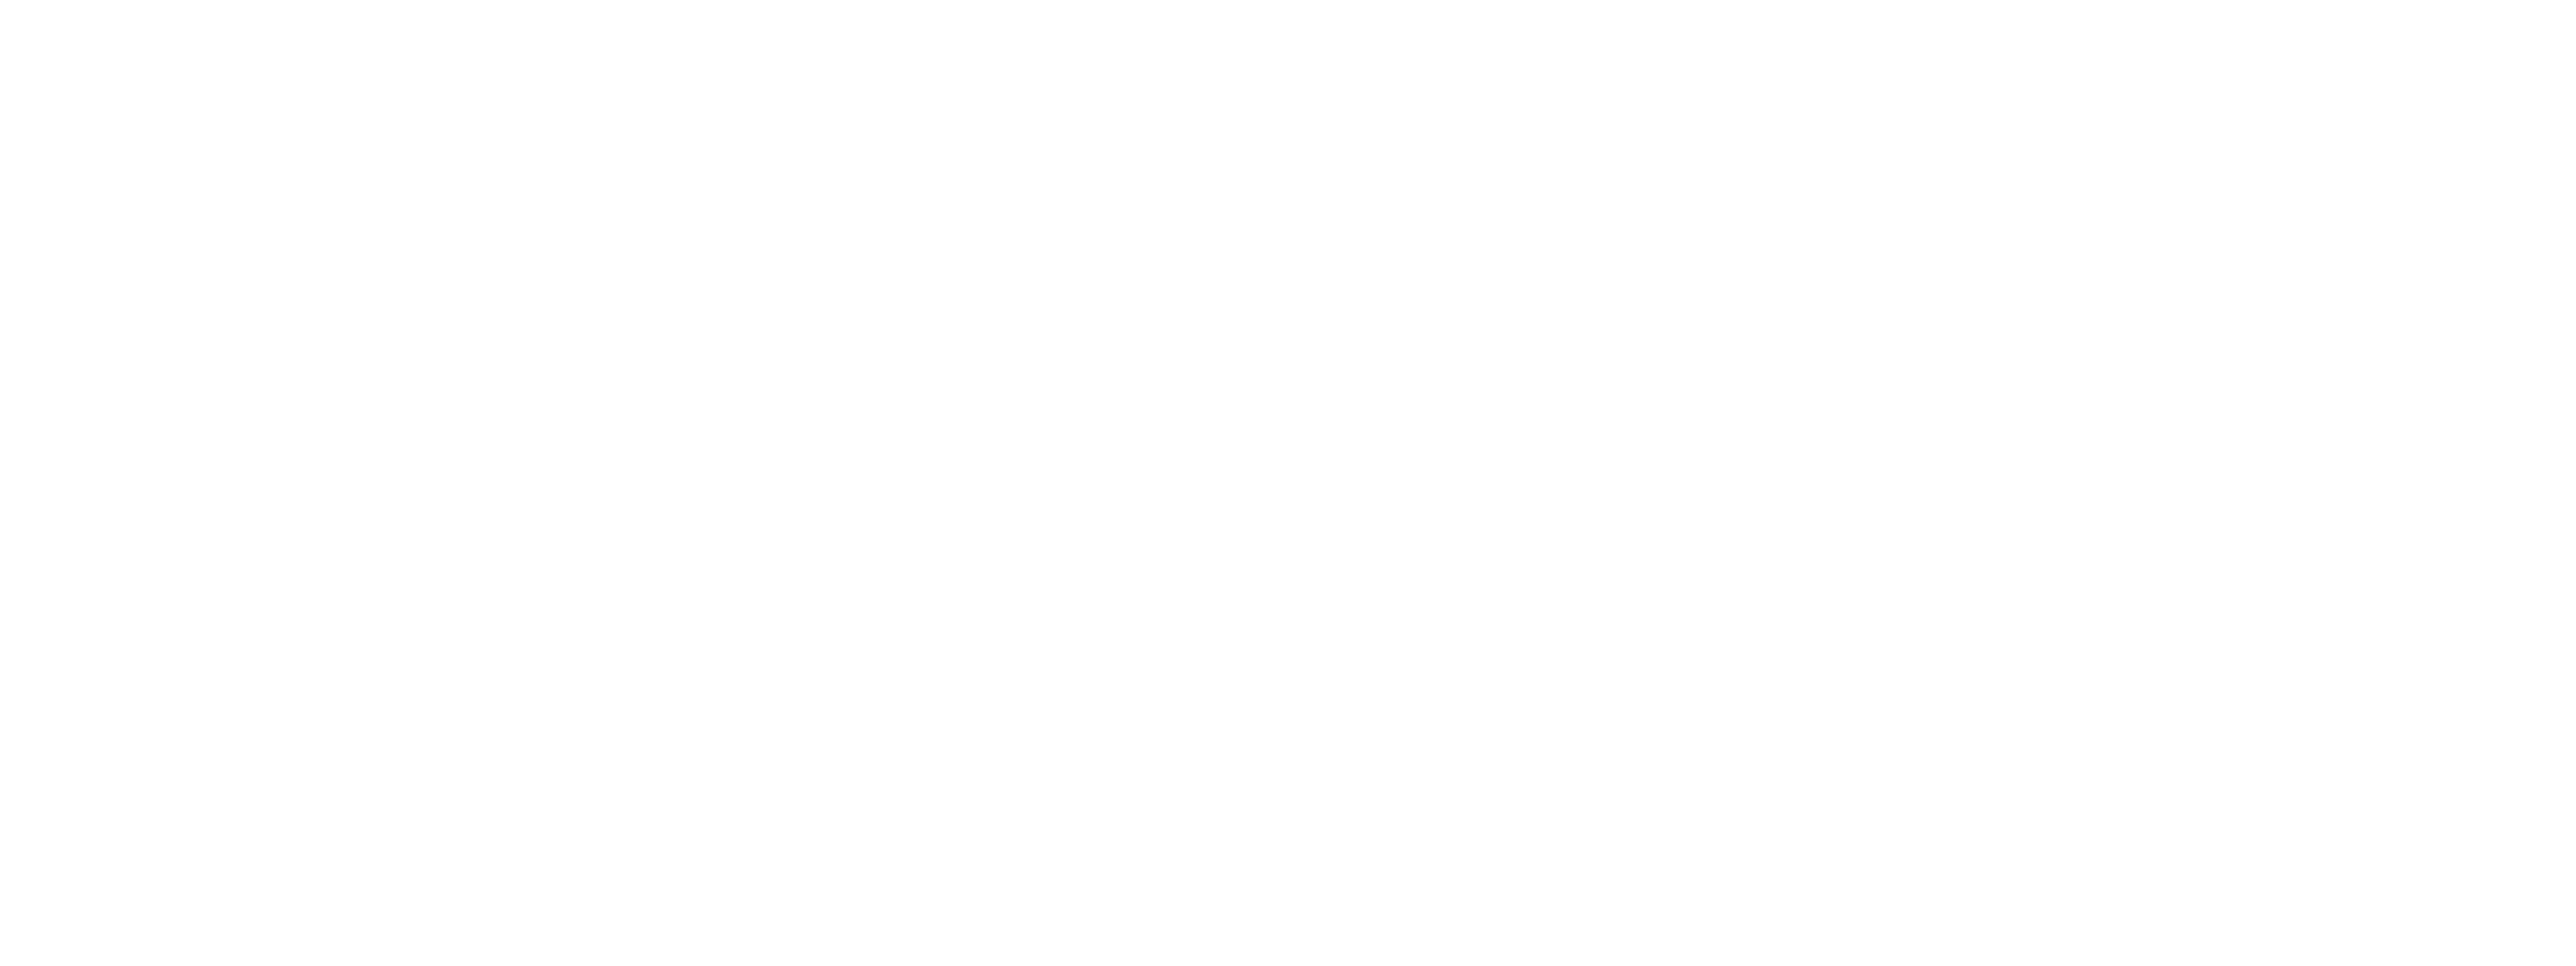 Norway Sans Display is a geometric sans-serif for big, big use across the whole wide world. It has sharp horizontal and vertical cuts mixed with circular curves and a classic proportion.